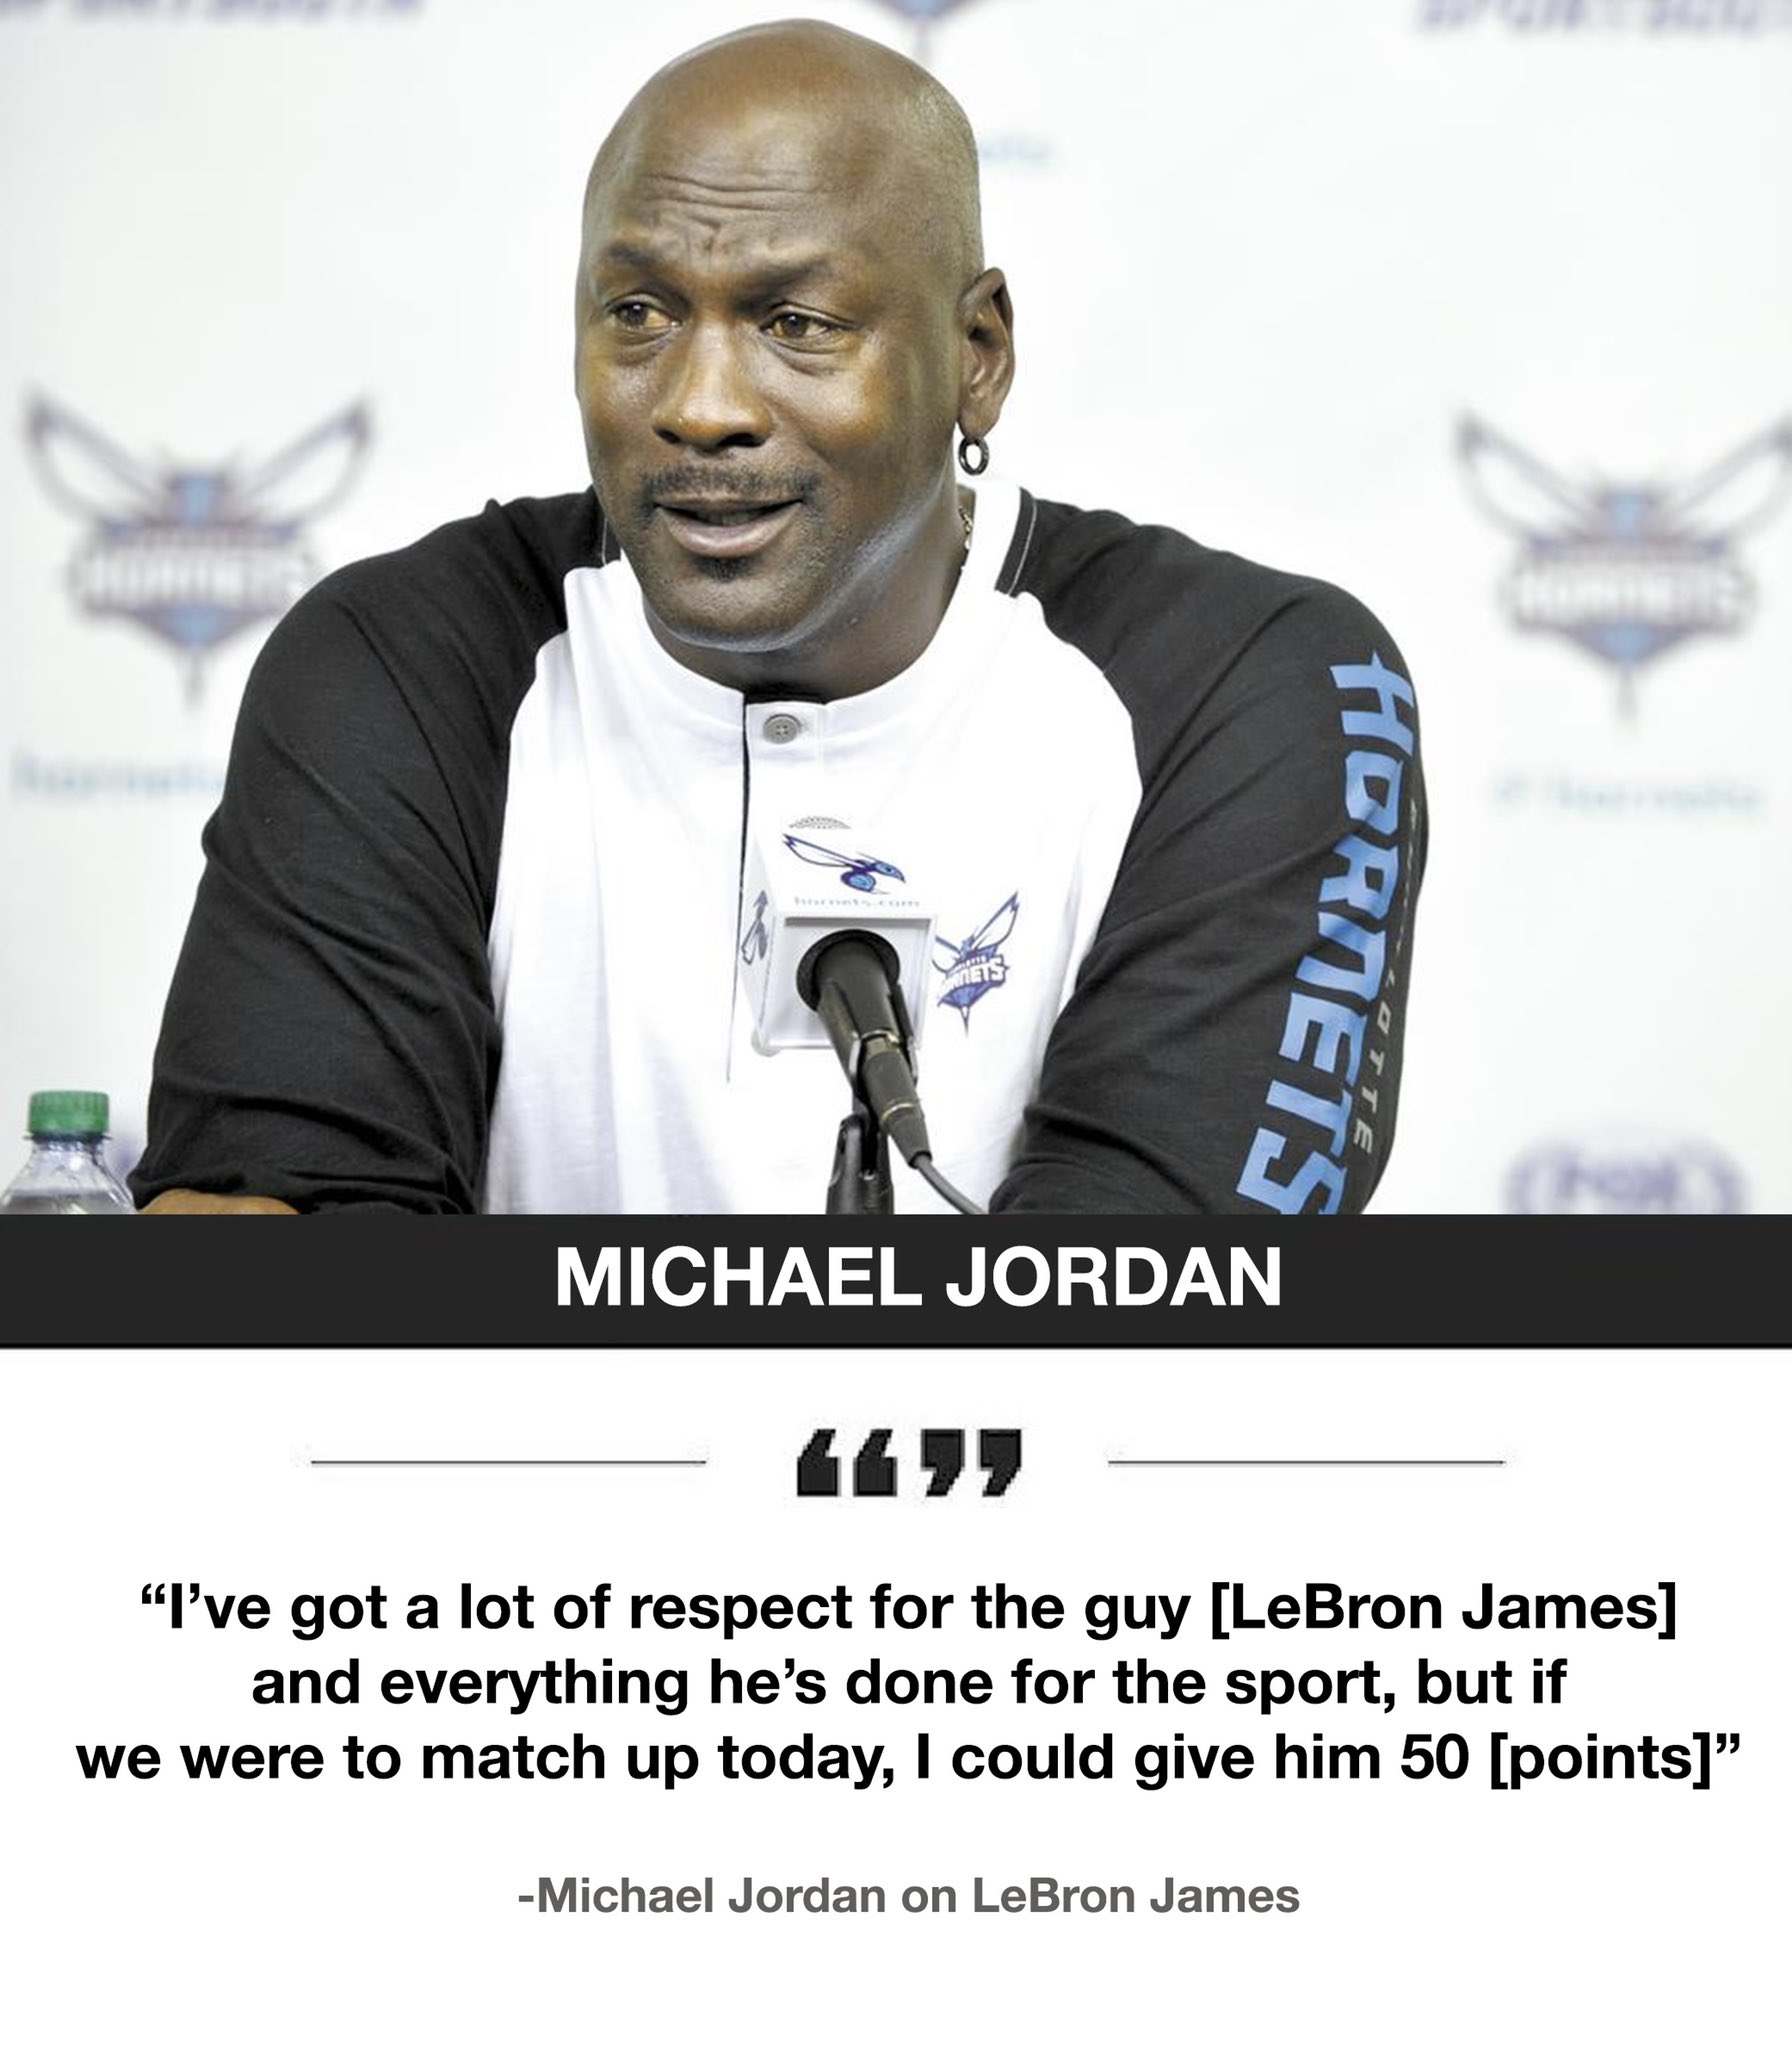 trae young dpoy on Twitter: "Michael Jordan wants his respect; The  Charlotte Hornets owner spoke to a reporter with @BallsackSports on Monday,  shining light on his thoughts since LeBron James passed Kareem